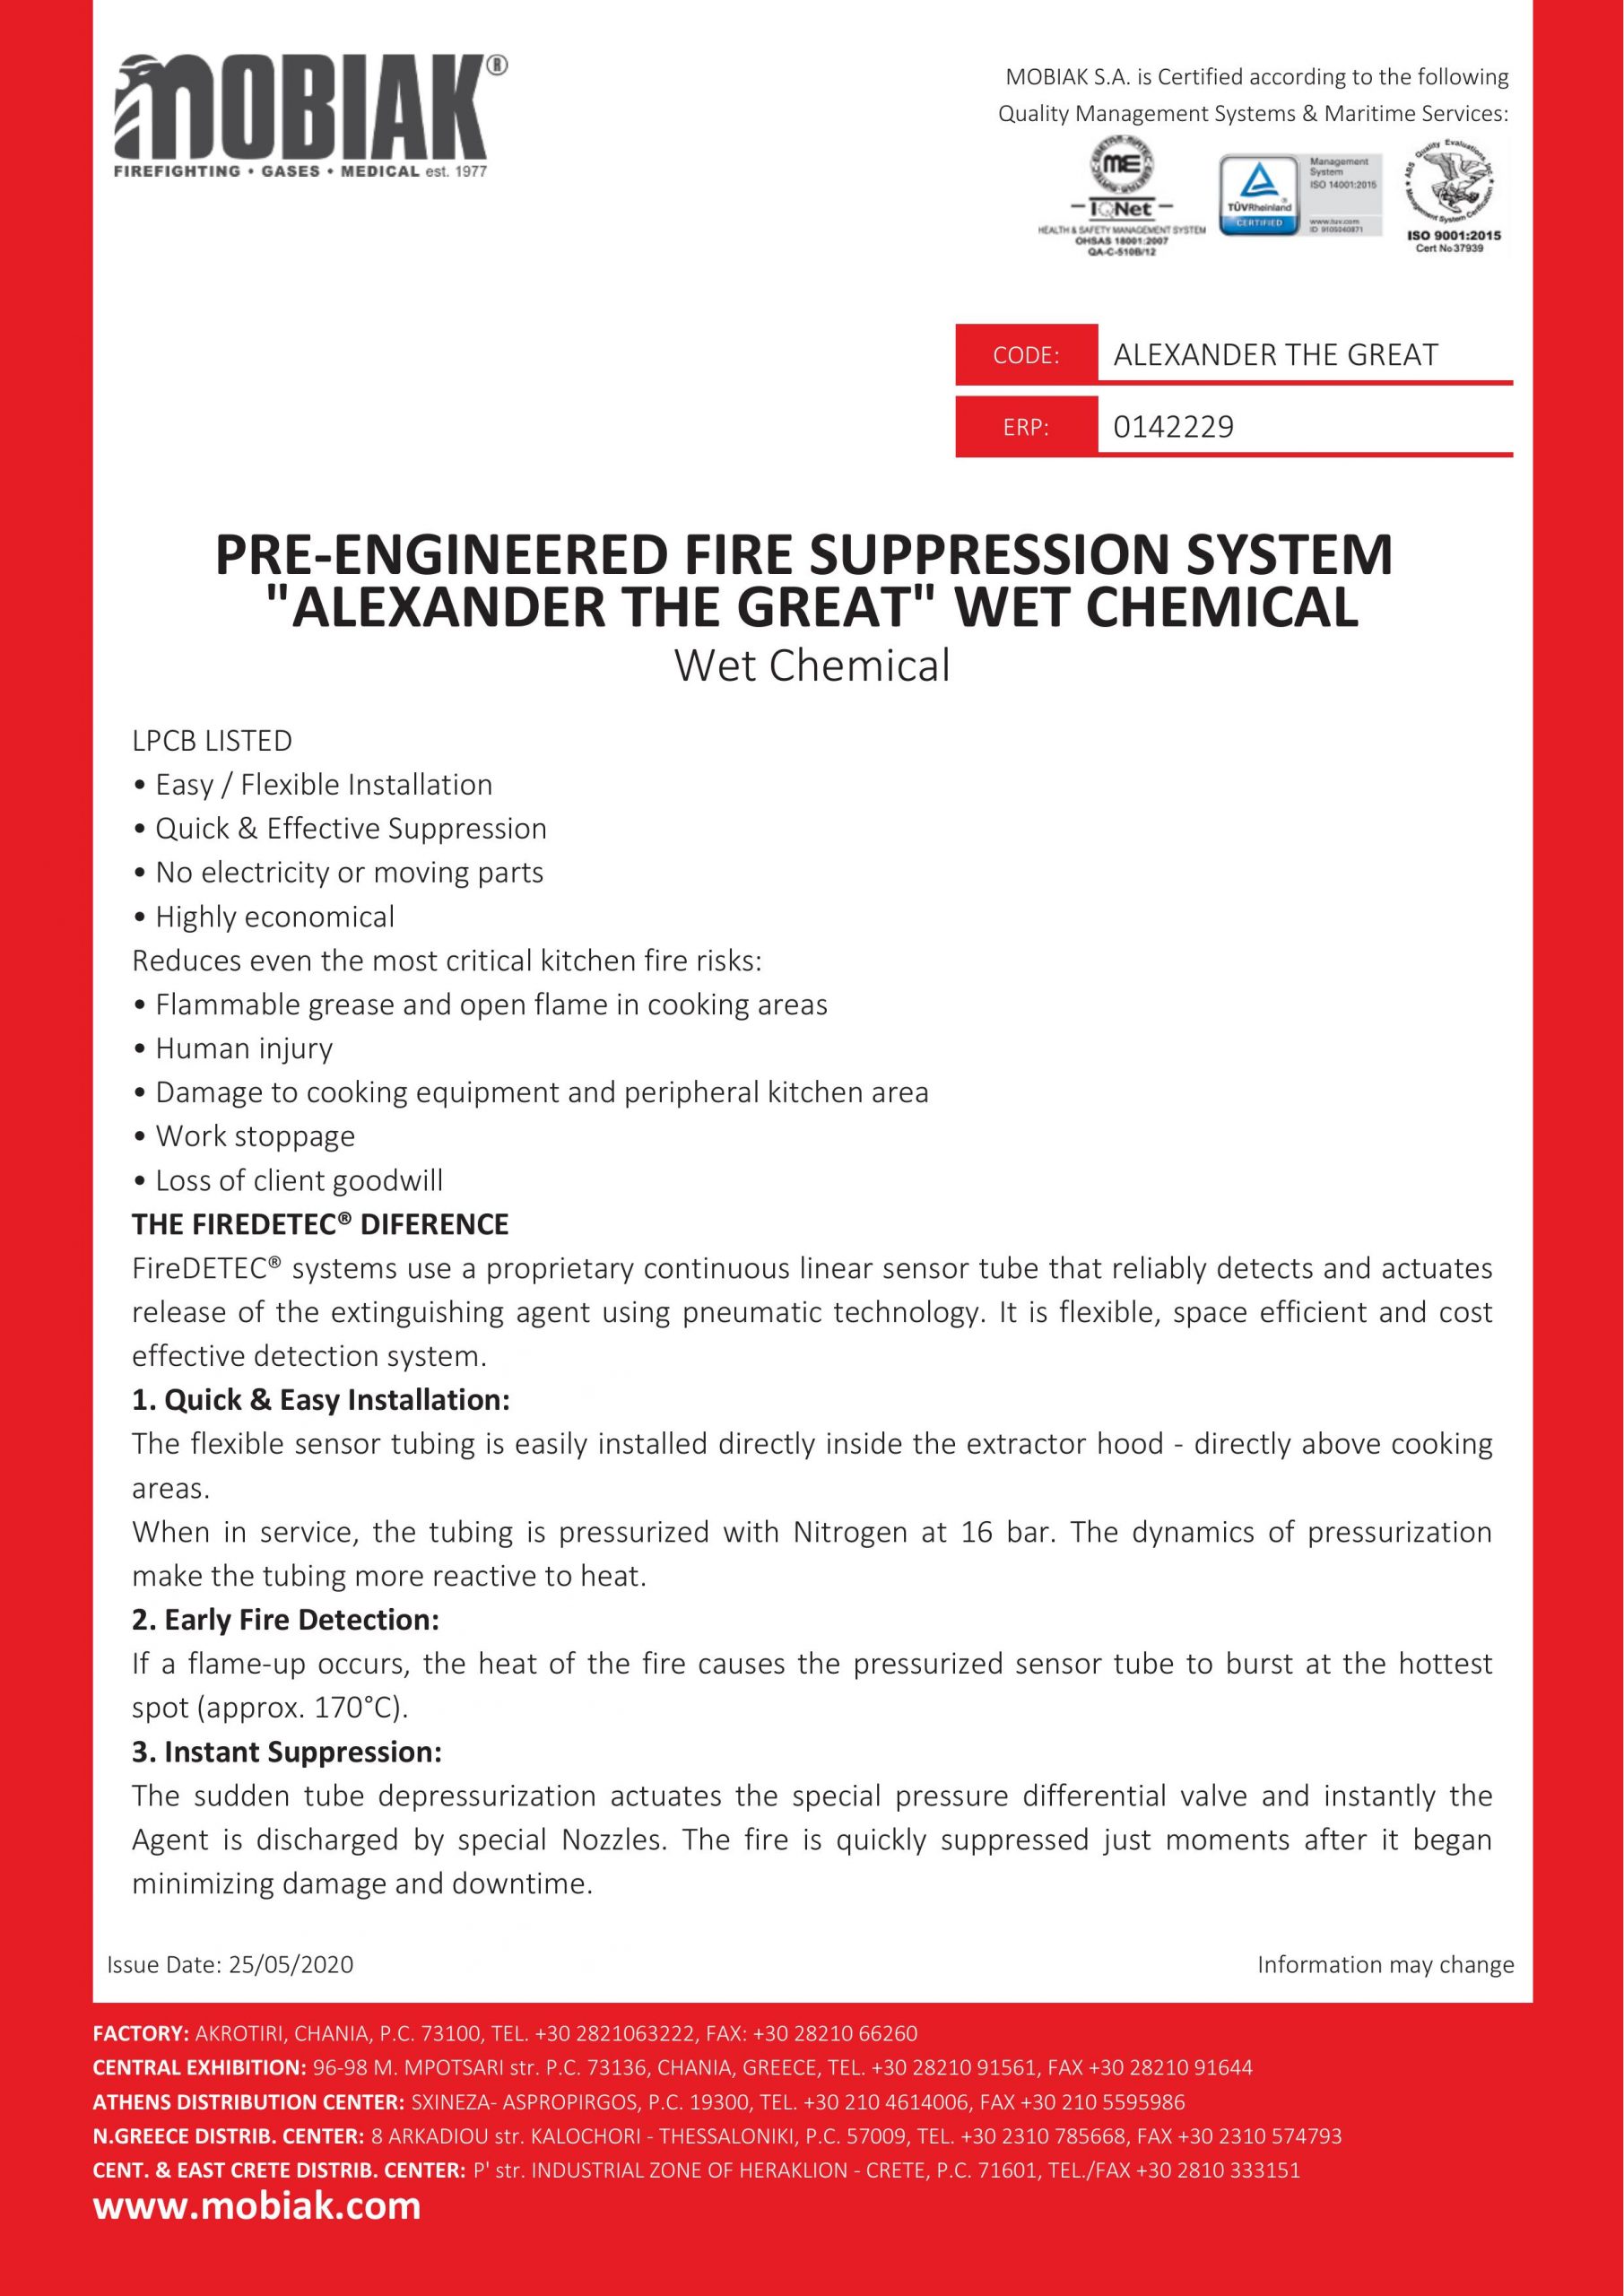 PRE-ENGINEERED-FIRE-SUPPRESSION-SYSTEM-ALEXANDER-THE-GREAT-WET-CHEMICAL_en (1)-1